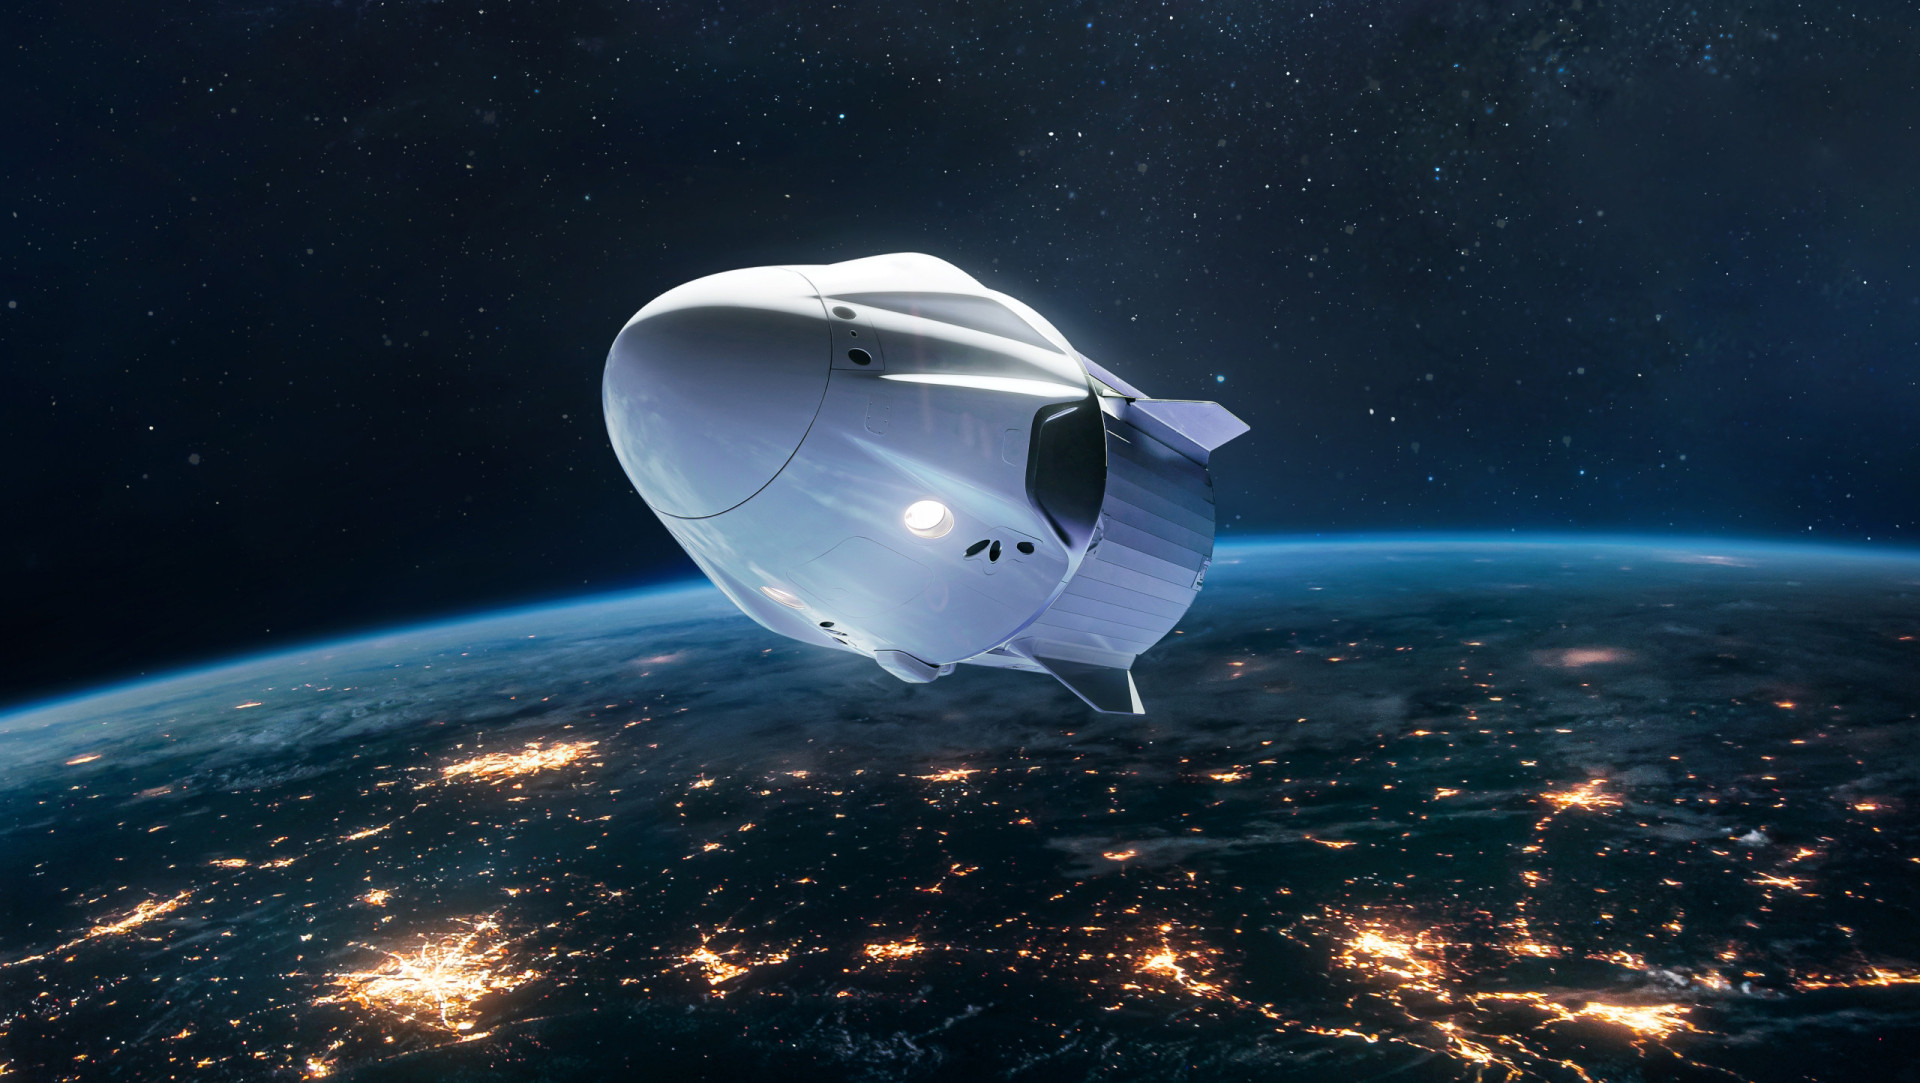 <p>Companies like SpaceX, Blue Origin, and Virgin Galactic are turning space tourism into reality. Their efforts range from offering suborbital flights to ambitious plans for orbital hotels, bringing space travel closer to public accessibility.</p><p><a href="https://www.msn.com/en-us/community/channel/vid-7xx8mnucu55yw63we9va2gwr7uihbxwc68fxqp25x6tg4ftibpra?cvid=94631541bc0f4f89bfd59158d696ad7e">Follow us and access great exclusive content every day</a></p>